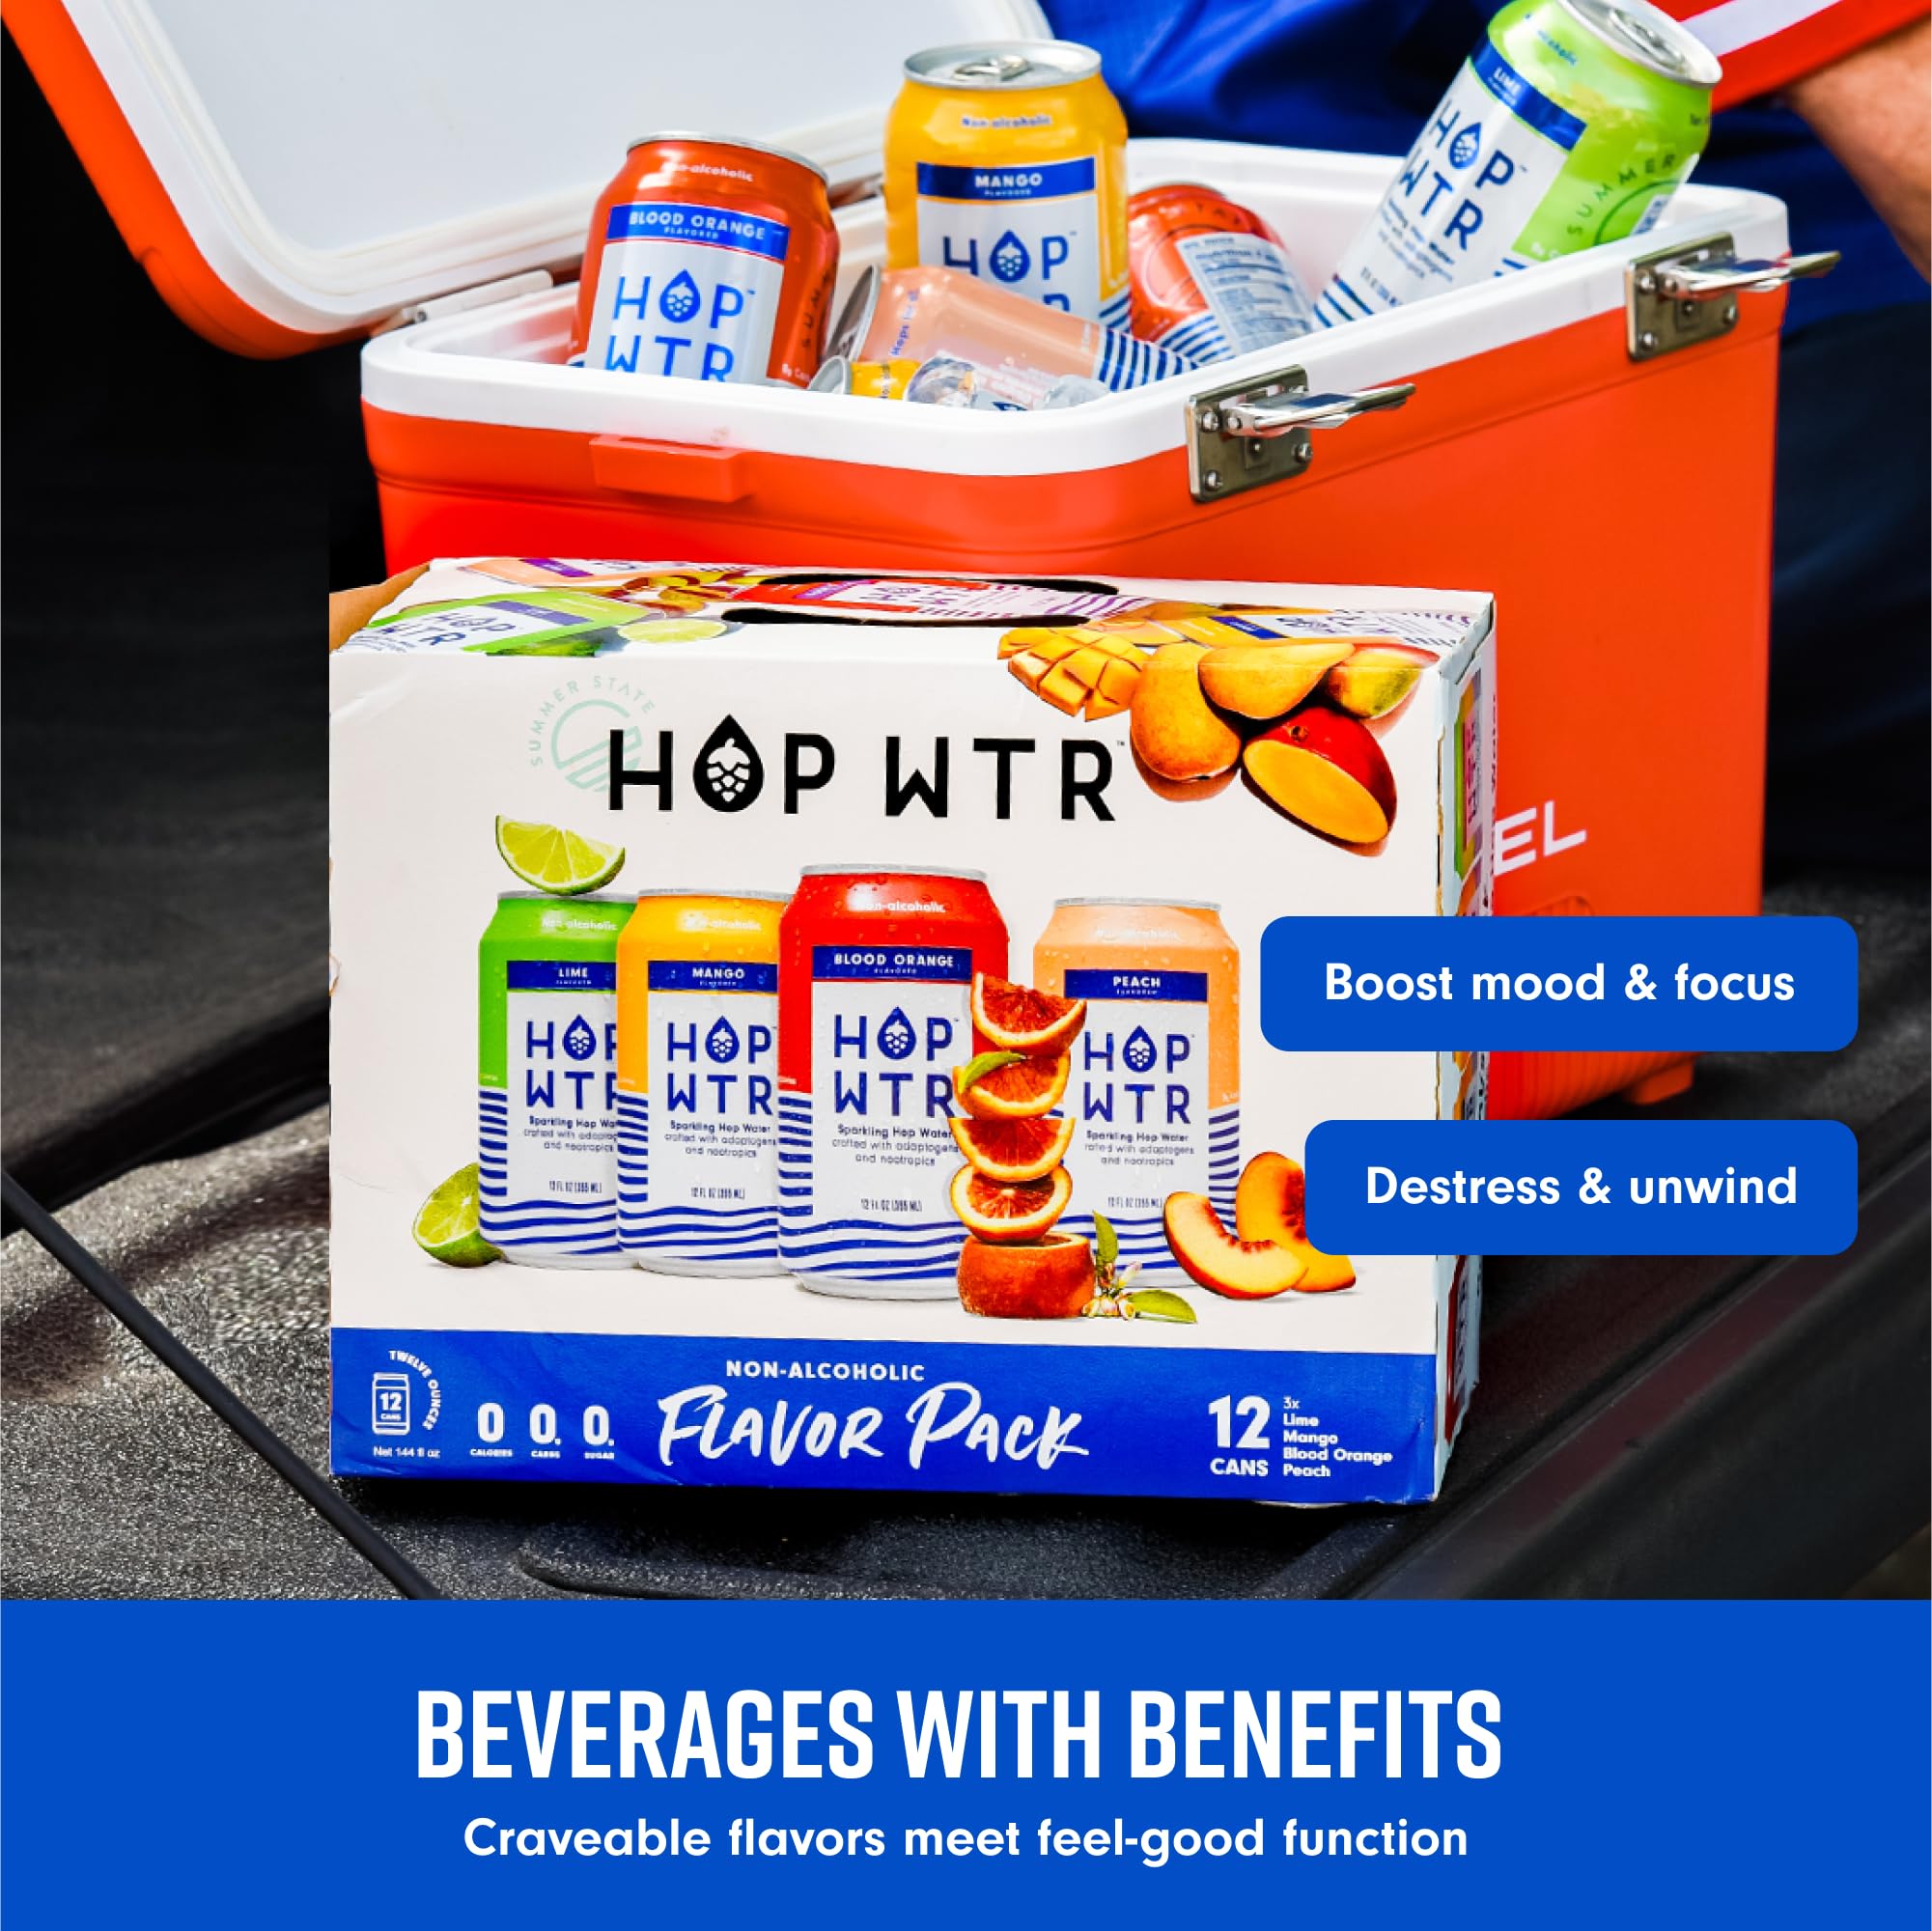 HOP WTR Sparkling Hop Water, Variety Pack 12 Pack, Sugar Free, Low Carb Non Alcoholic Drinks, NA Beer, Adaptogen Drink, No Calories, Adaptogens & Nootropics for Added Benefits, 12 oz Cans